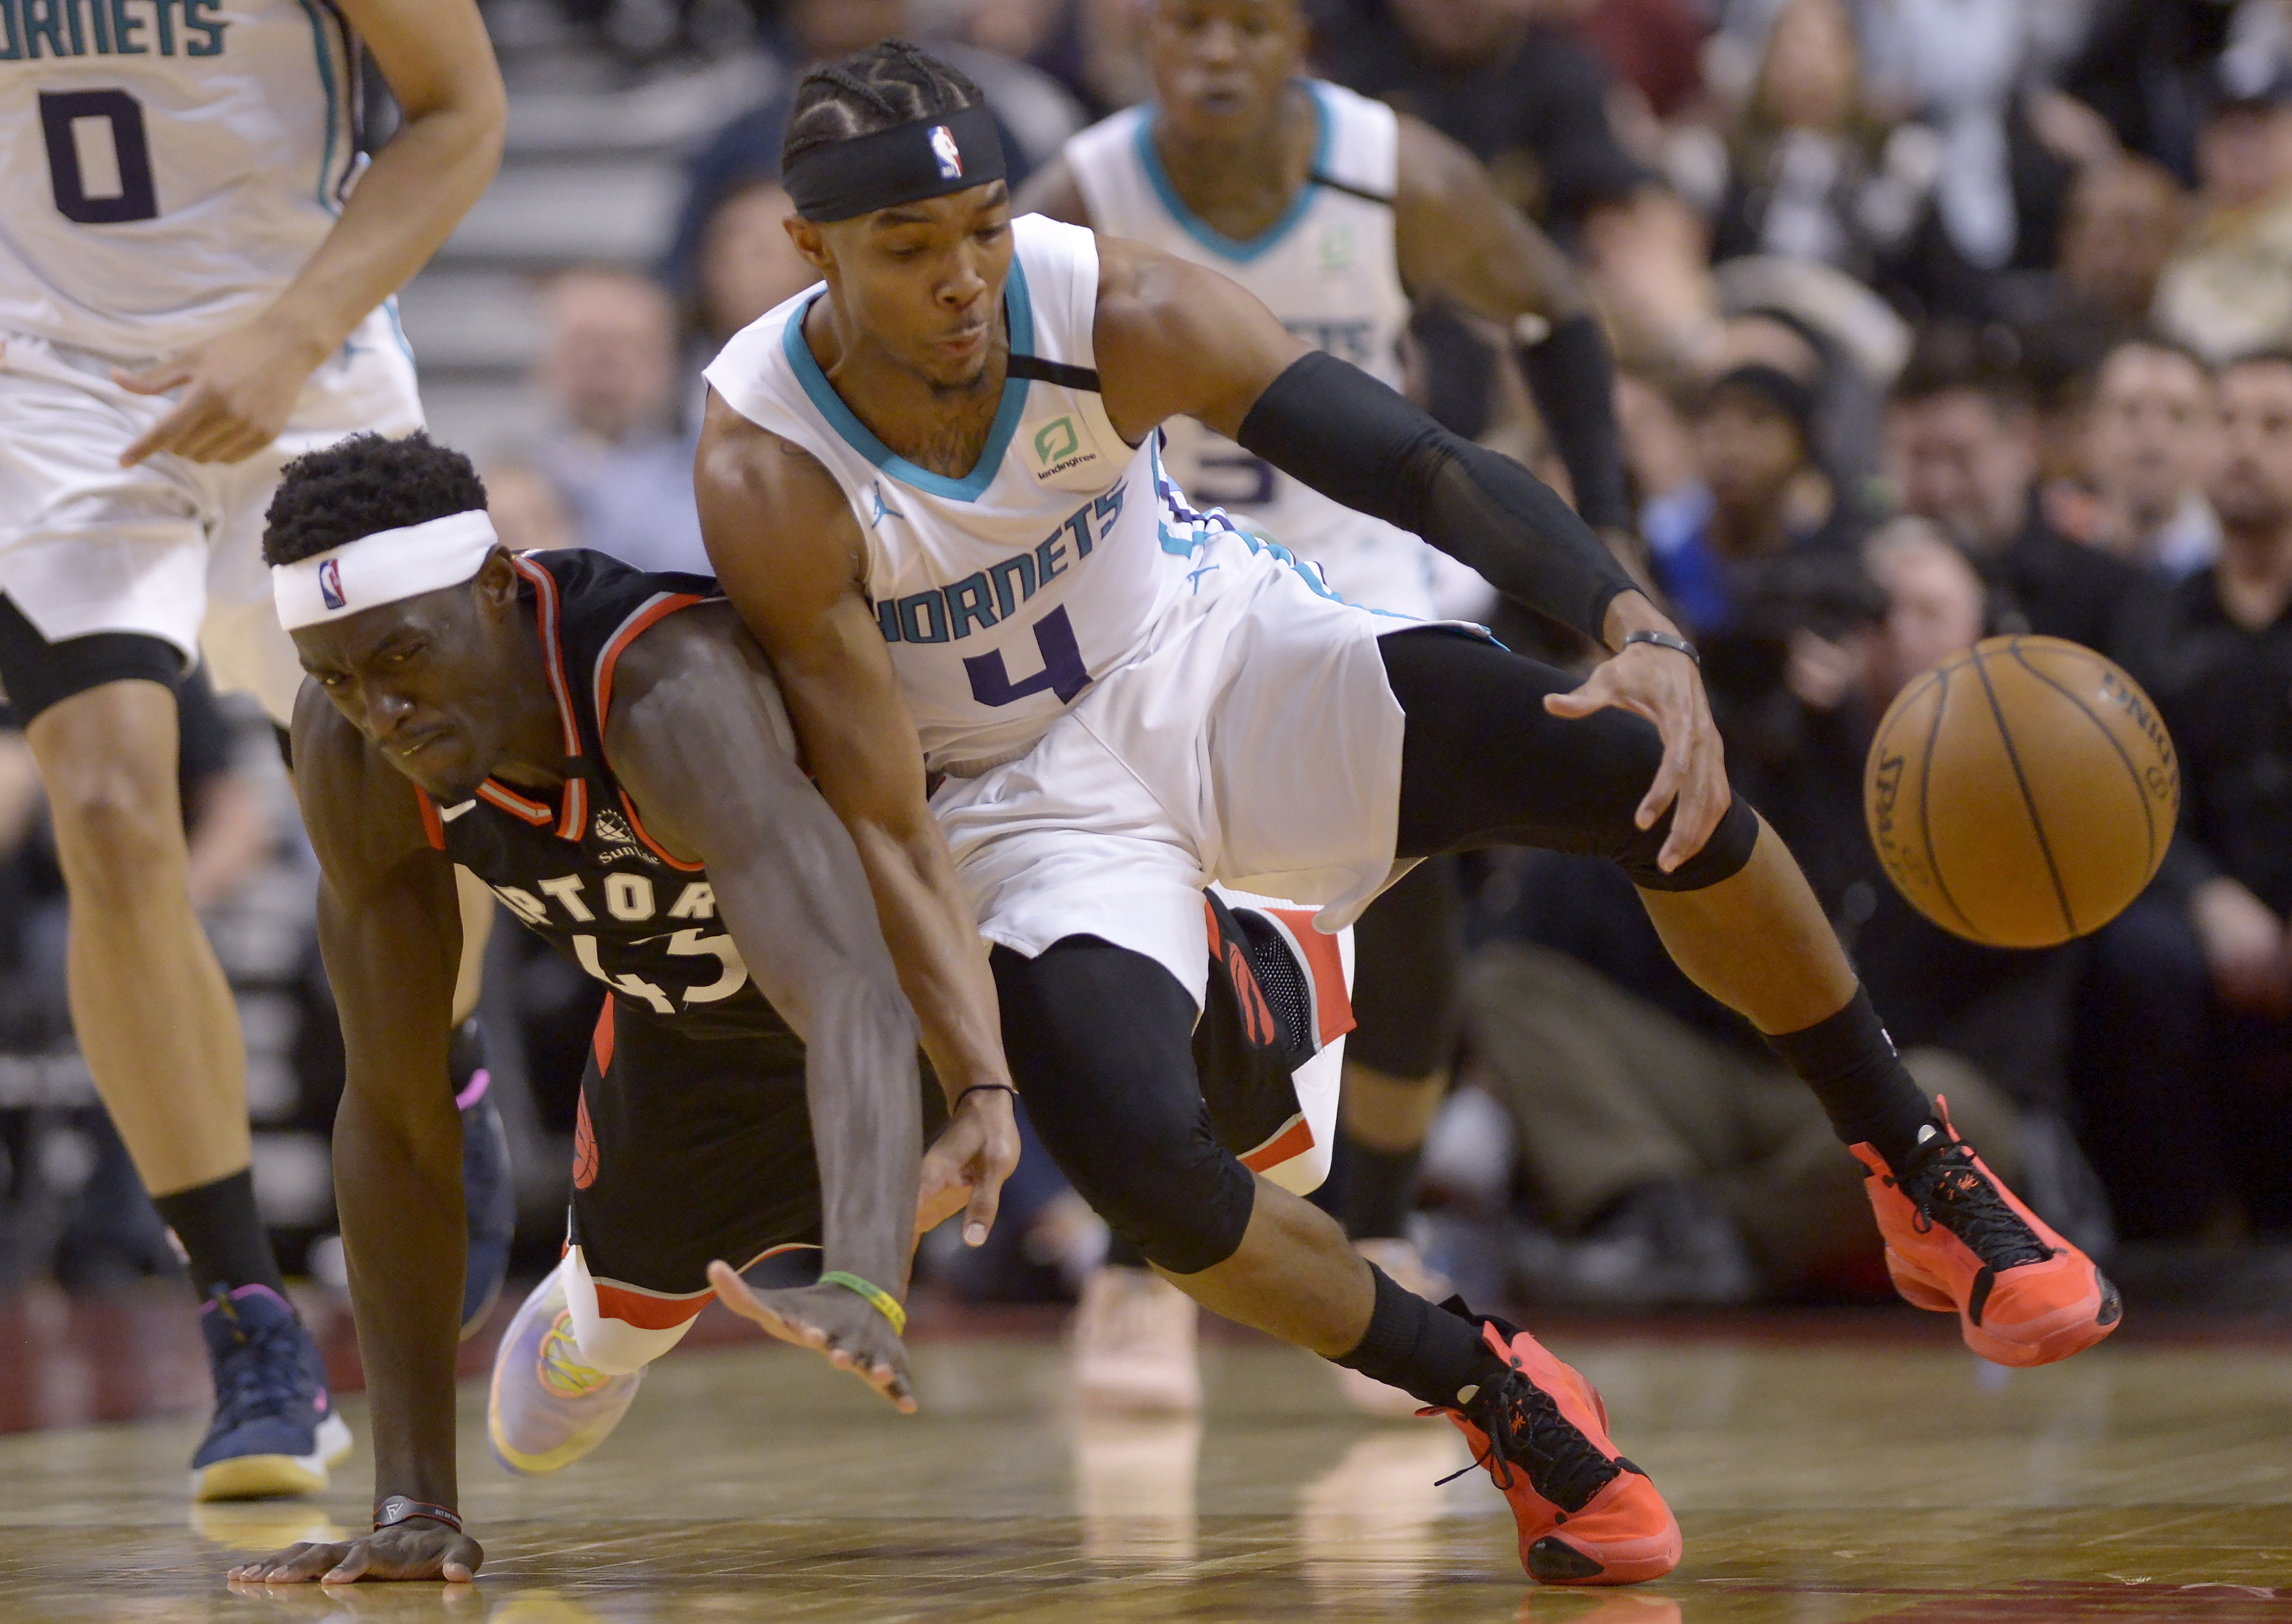 Rozier's late free throw lift Hornets past Raptors 99-96